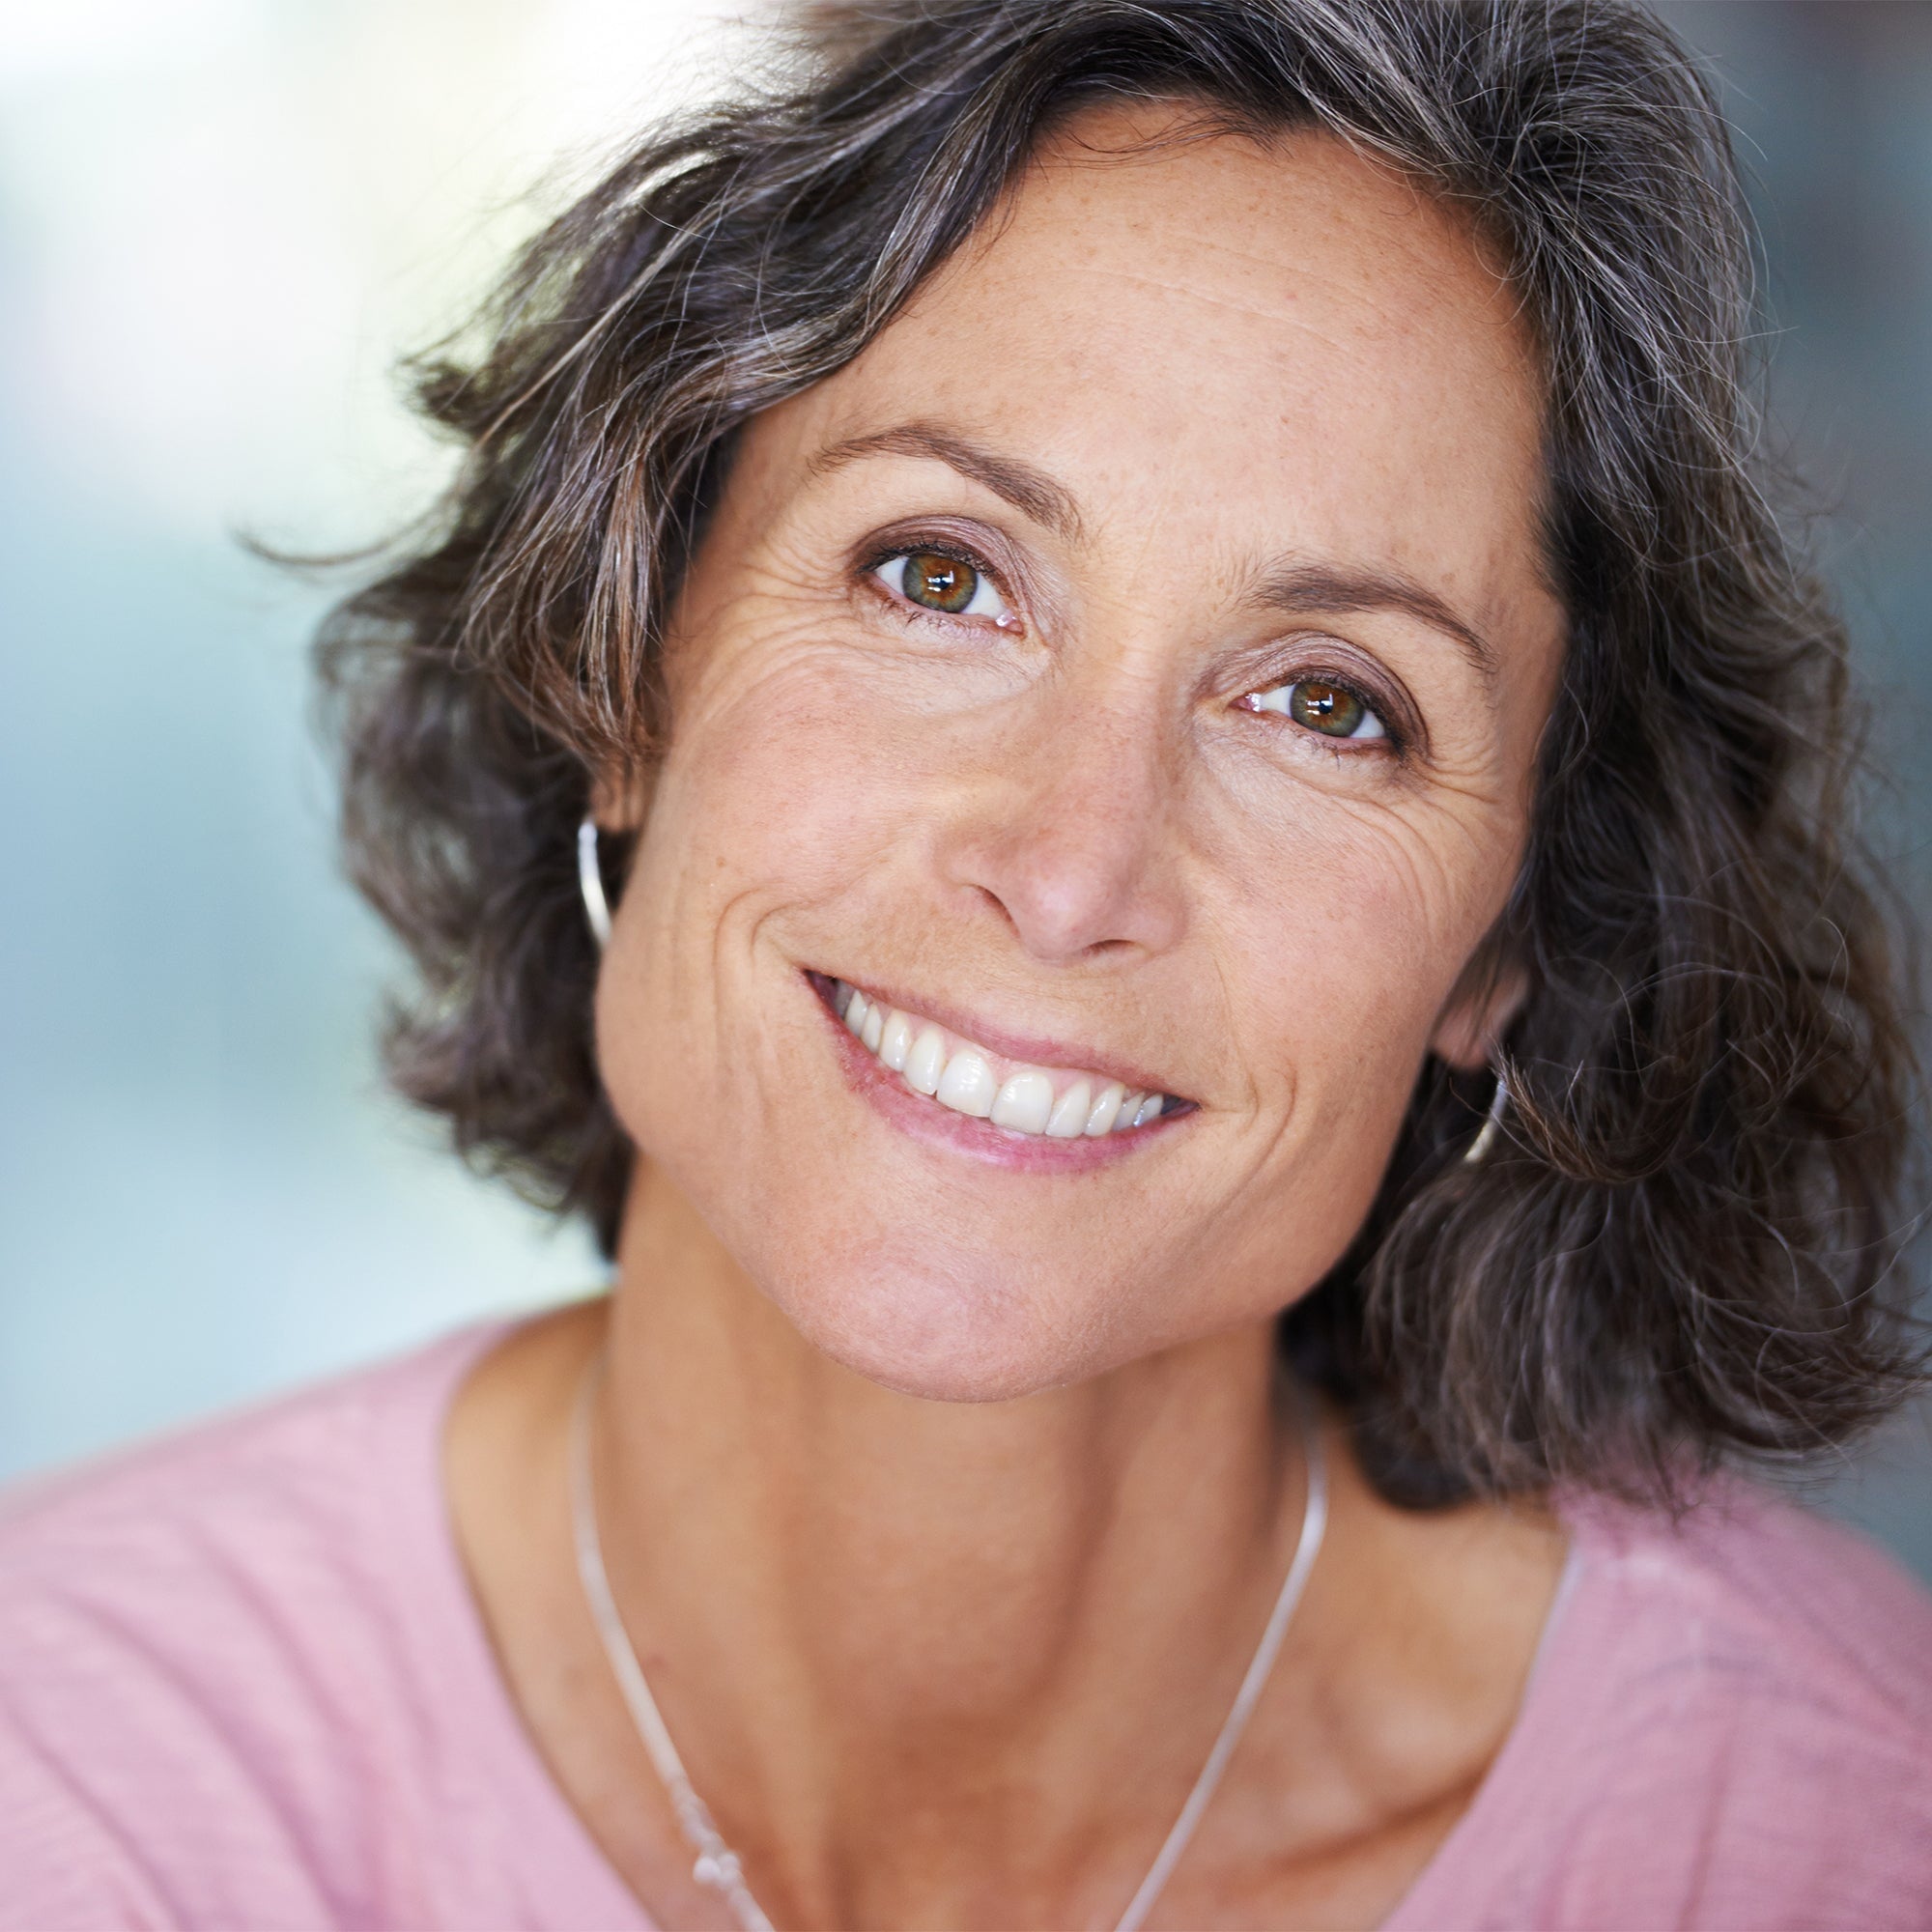 photo of a woman in her 40s smiling, dry skin and menopause